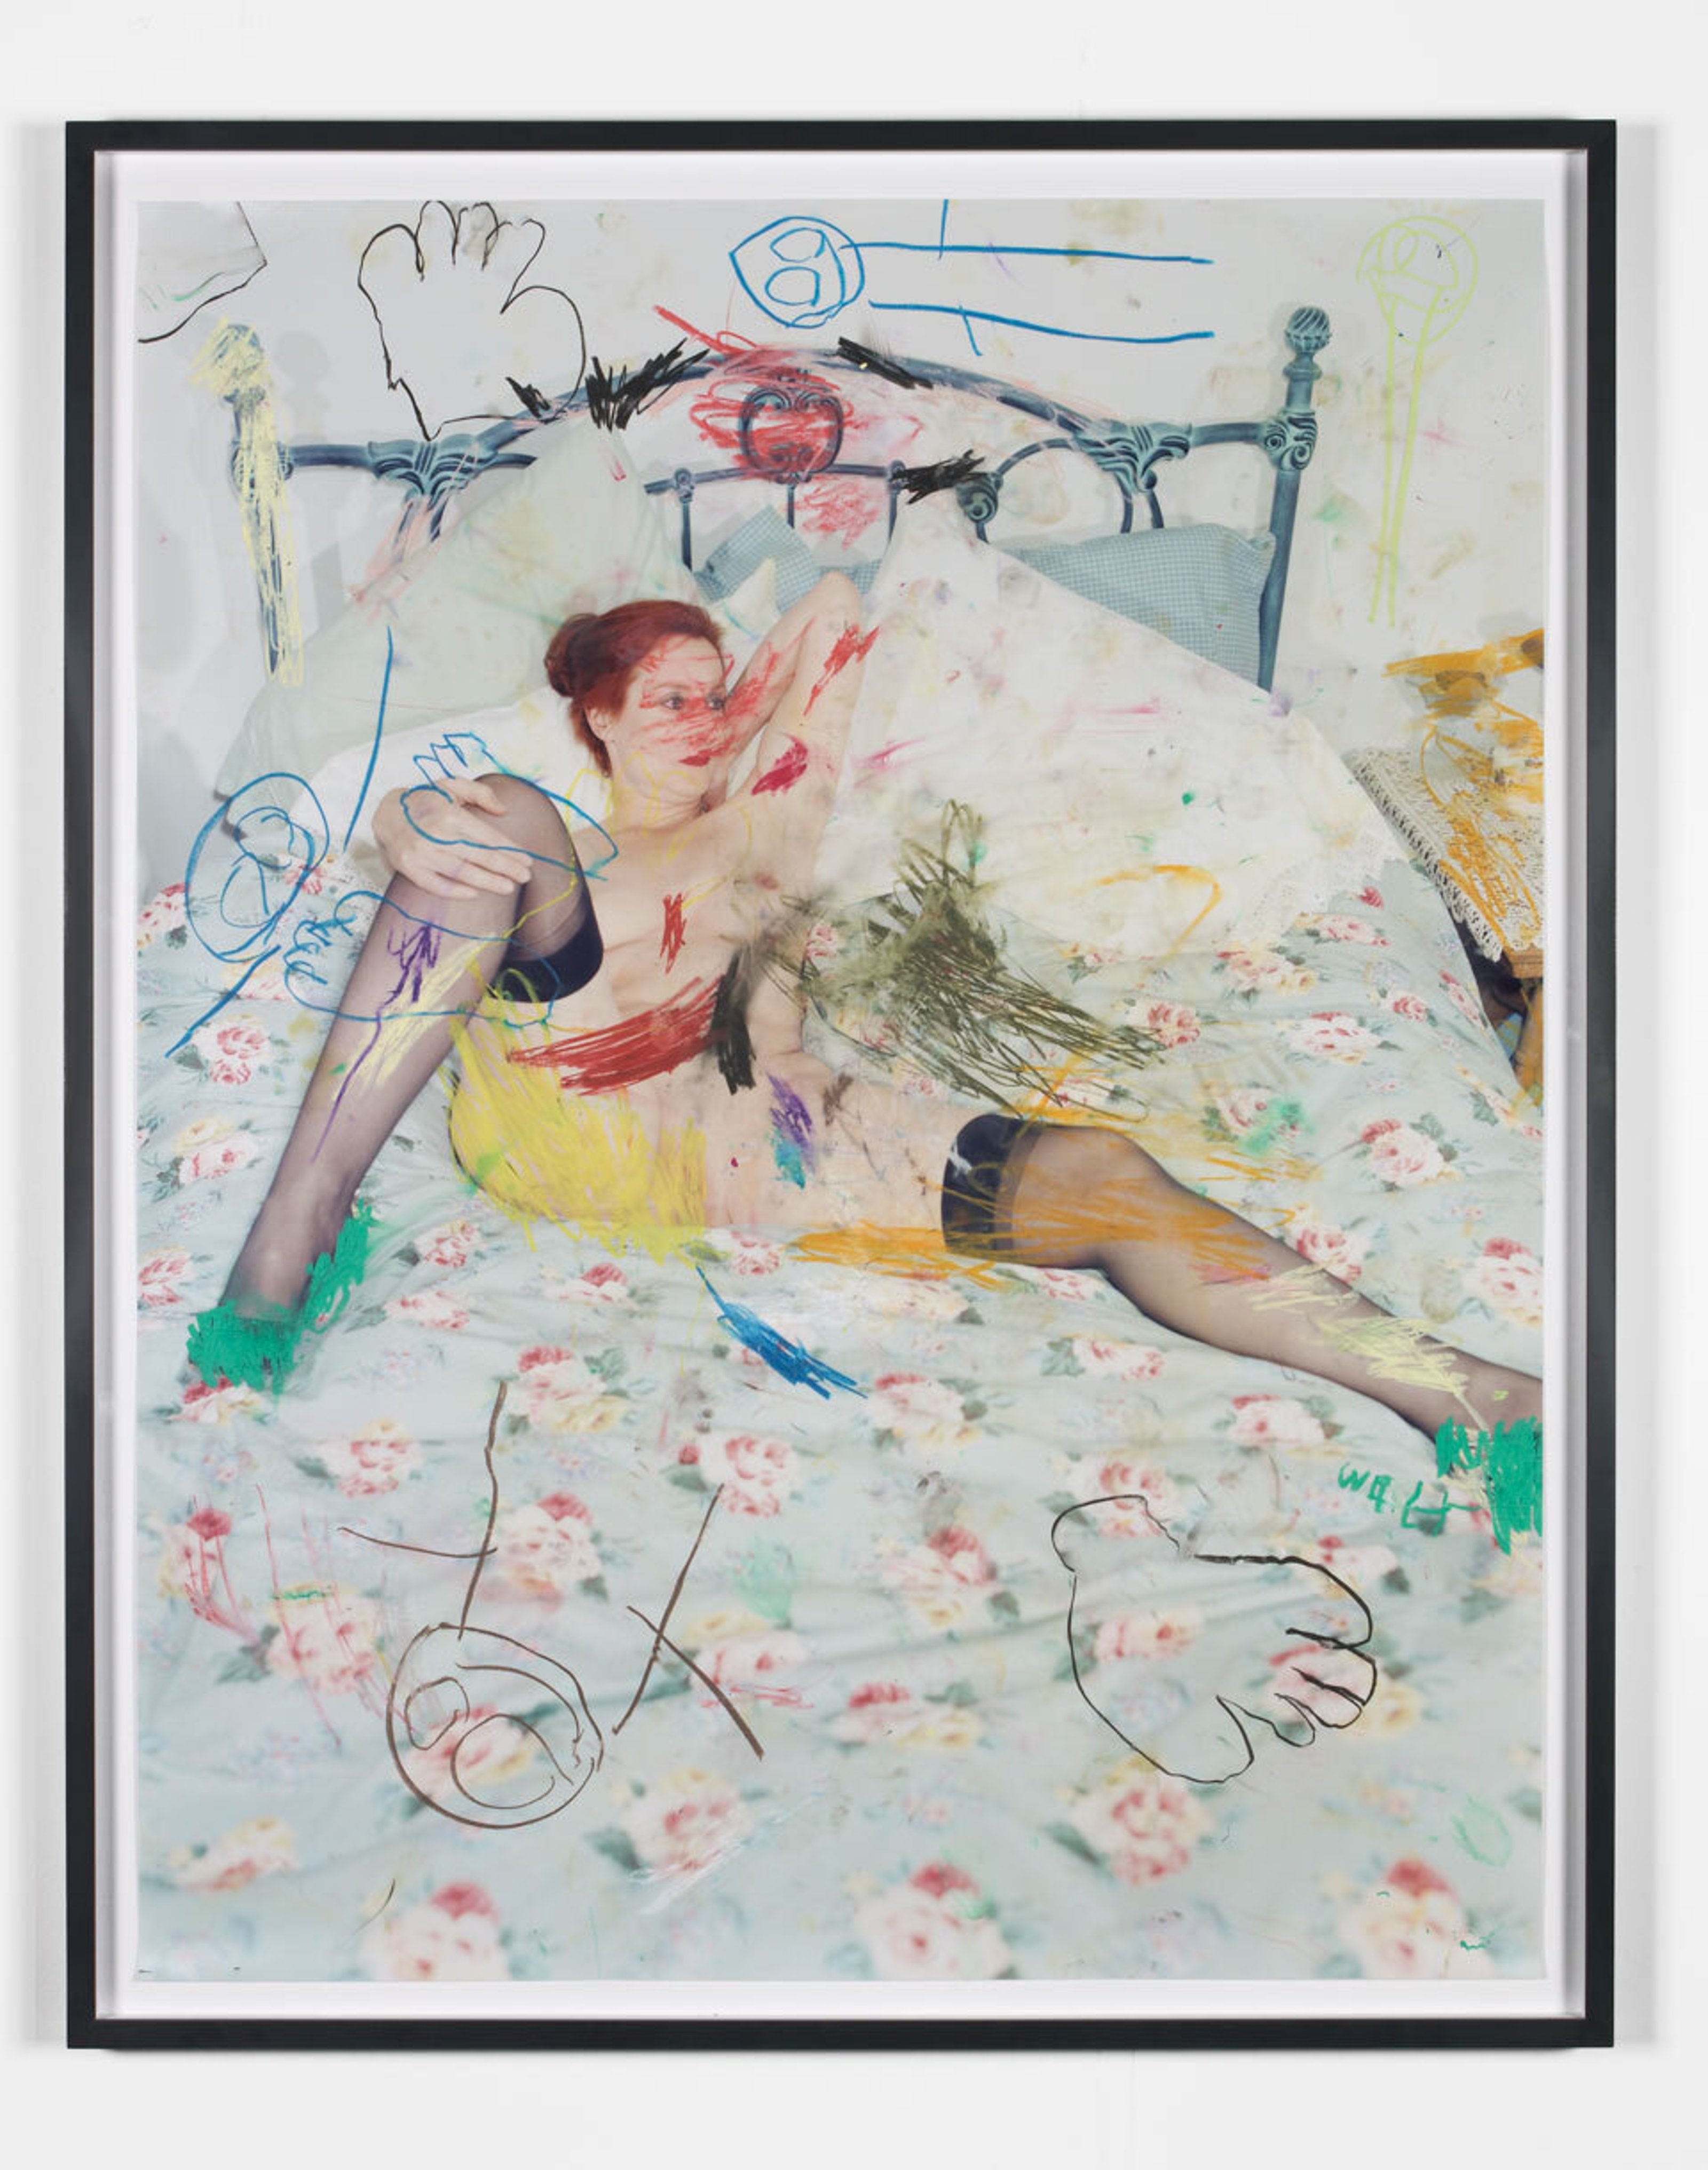 Photograph of a woman lying nude on a bed, with nondescript drawings on the image done in different colors of pastel paint